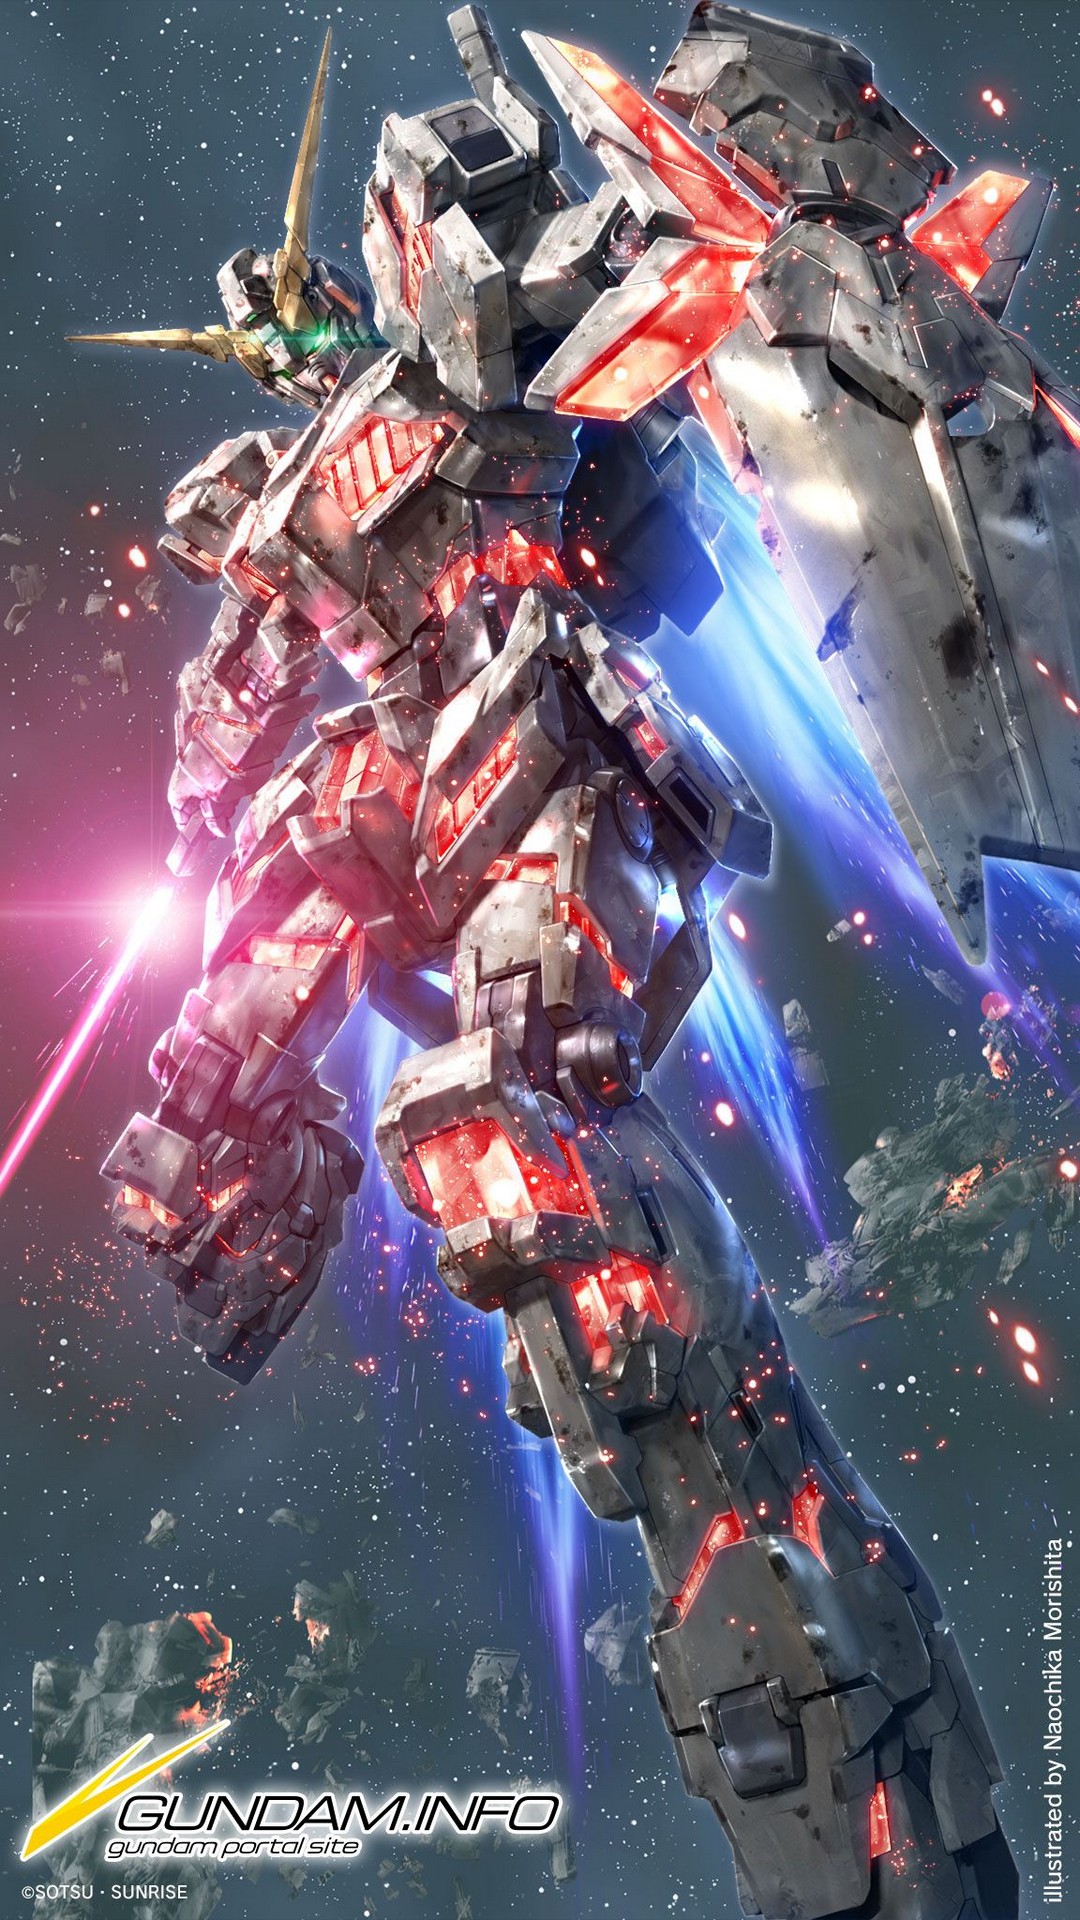 Wallpaper Android Gundam with high-resolution 1080x1920 pixel. You can use this wallpaper for your Android backgrounds, Tablet, Samsung Screensavers, Mobile Phone Lock Screen and another Smartphones device